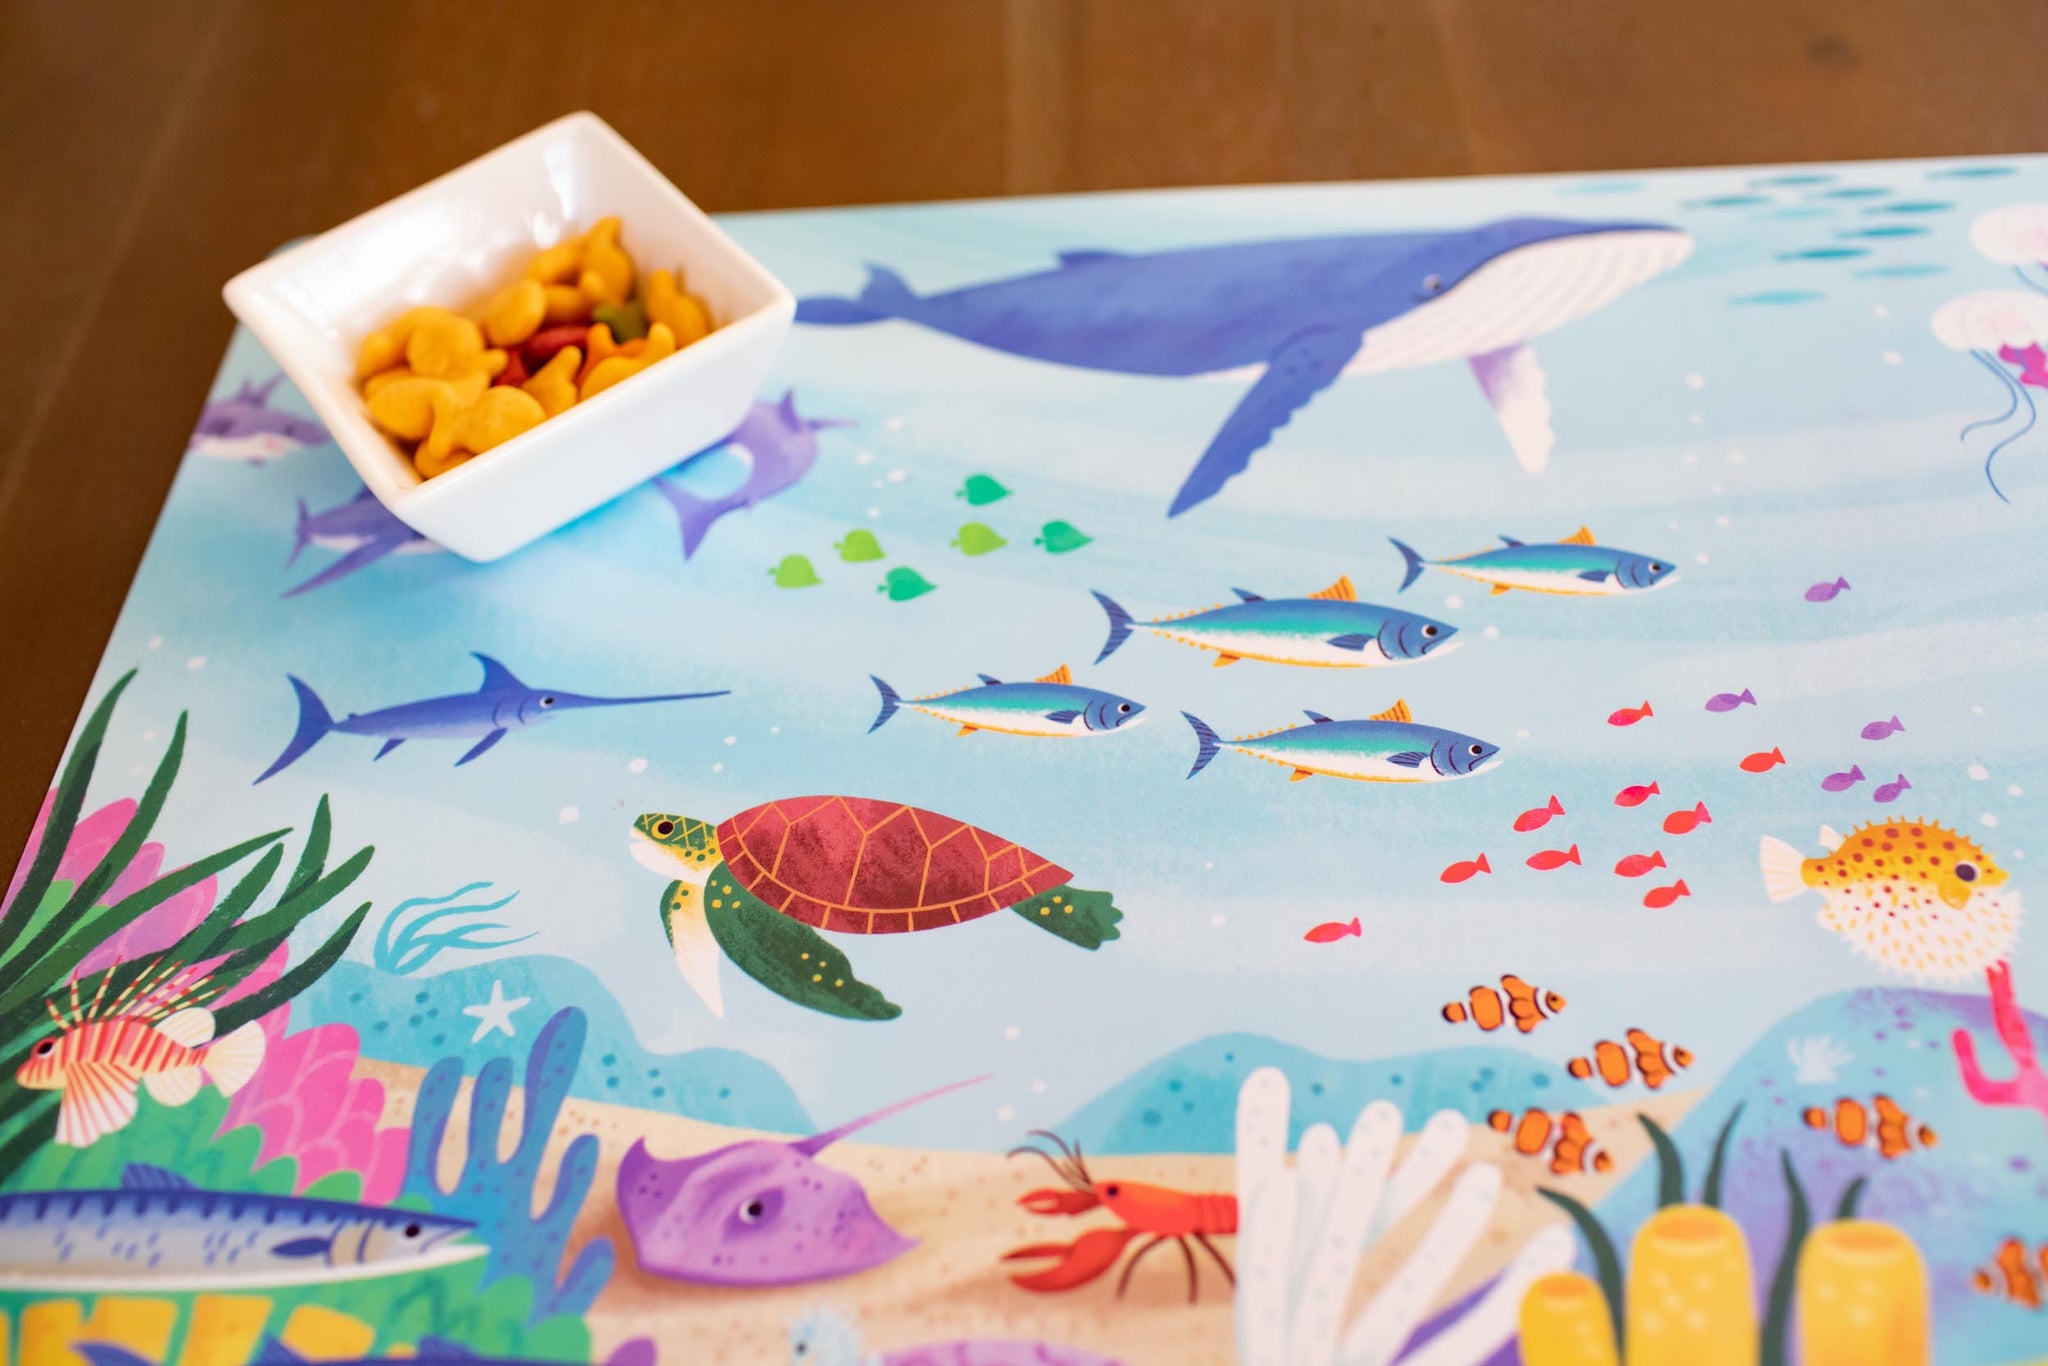 Under the Sea Placemat, Image of the Under the Sea Placemat, Ocean Placemats, Preschool and kindergarten activities, Sea creature placemat, ocean placemat, Placemat for toddler language development